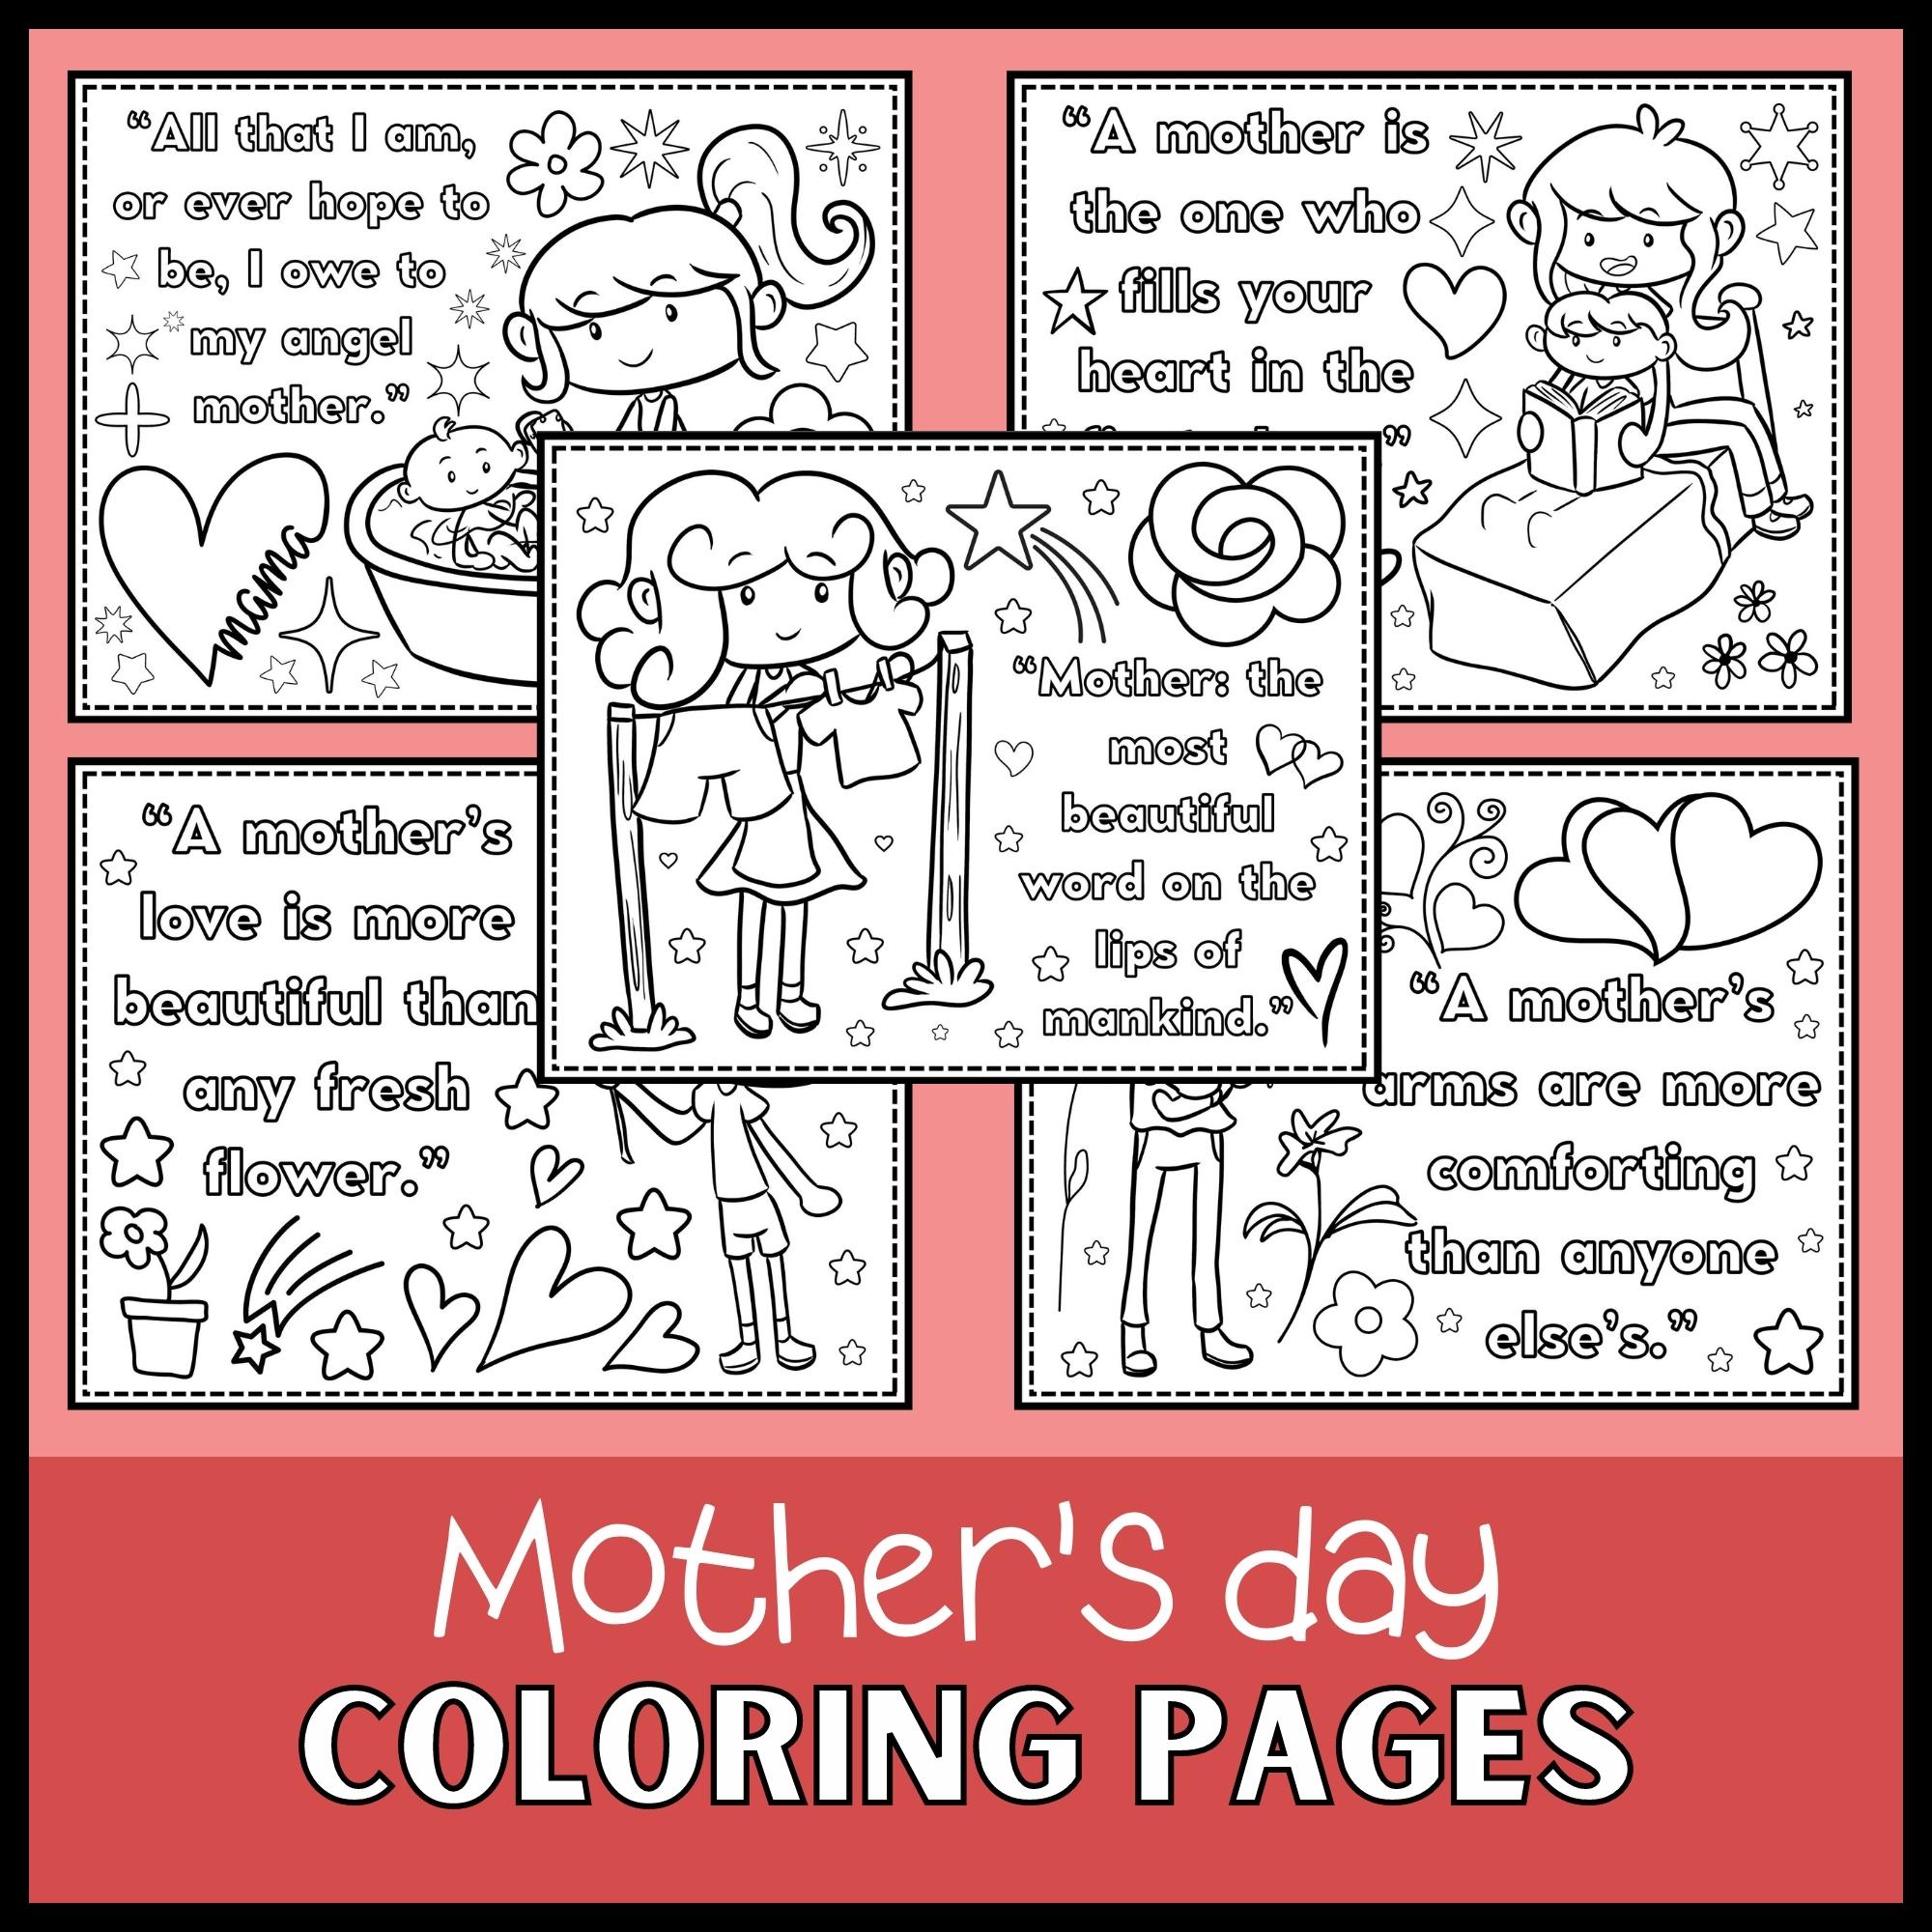 Mothers day coloring pages happy mothers day coloring sheets for kids may morning work made by teachers